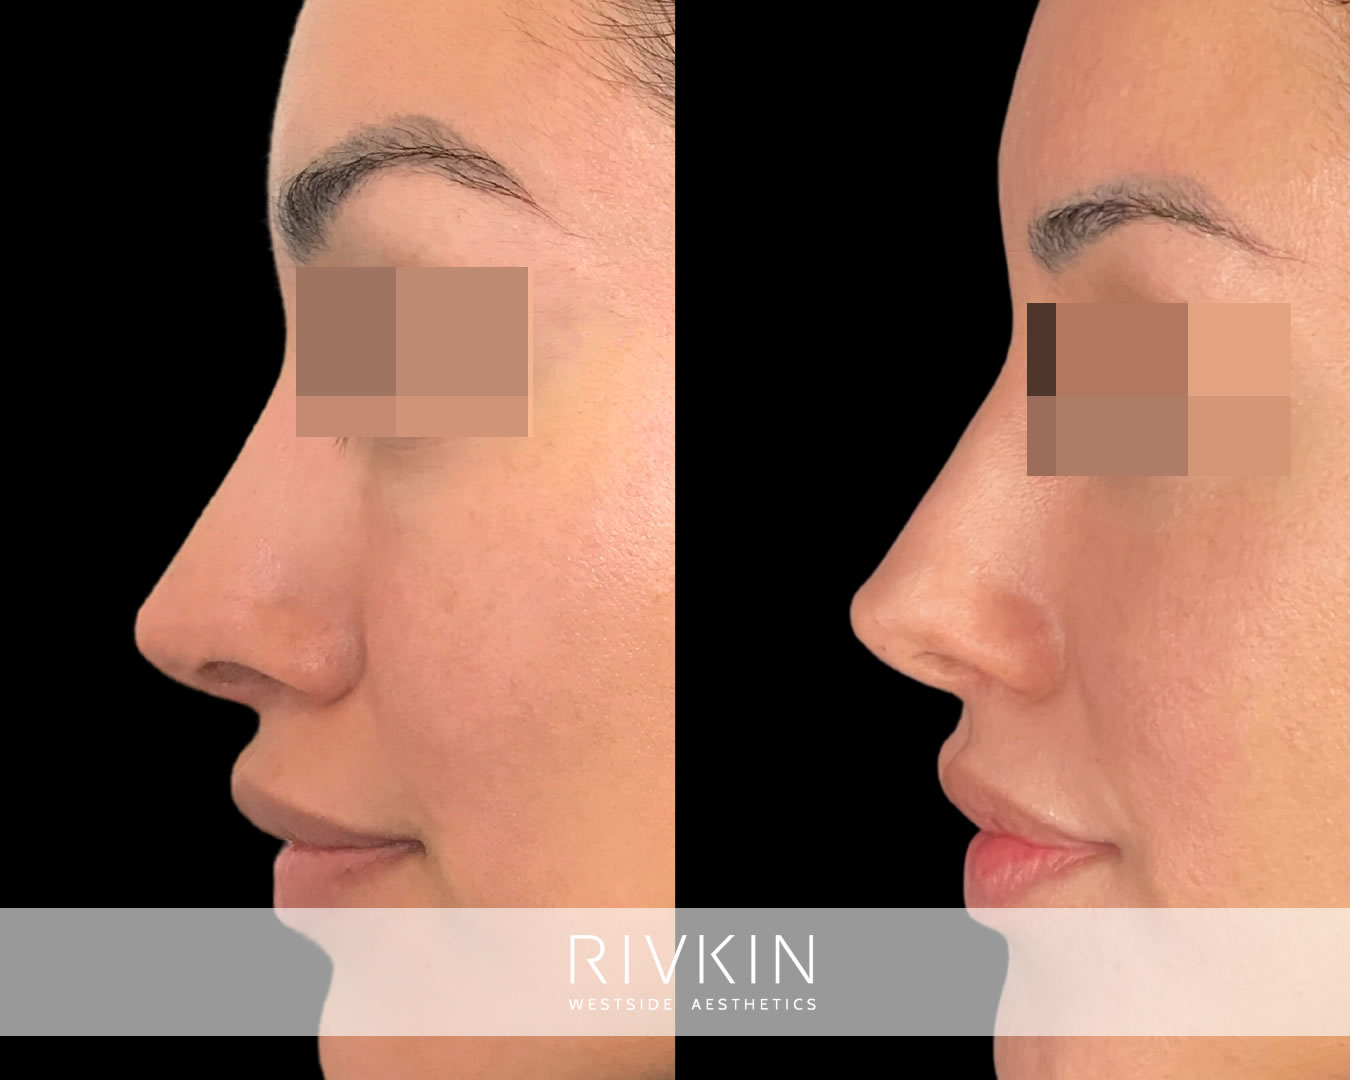 This patient wanted a more perky nose and less prominent nostril openings, so Dr. Rivkin lifted her tip and lowered her nostrils using simple filler injections. Results should last one to one and a half years.